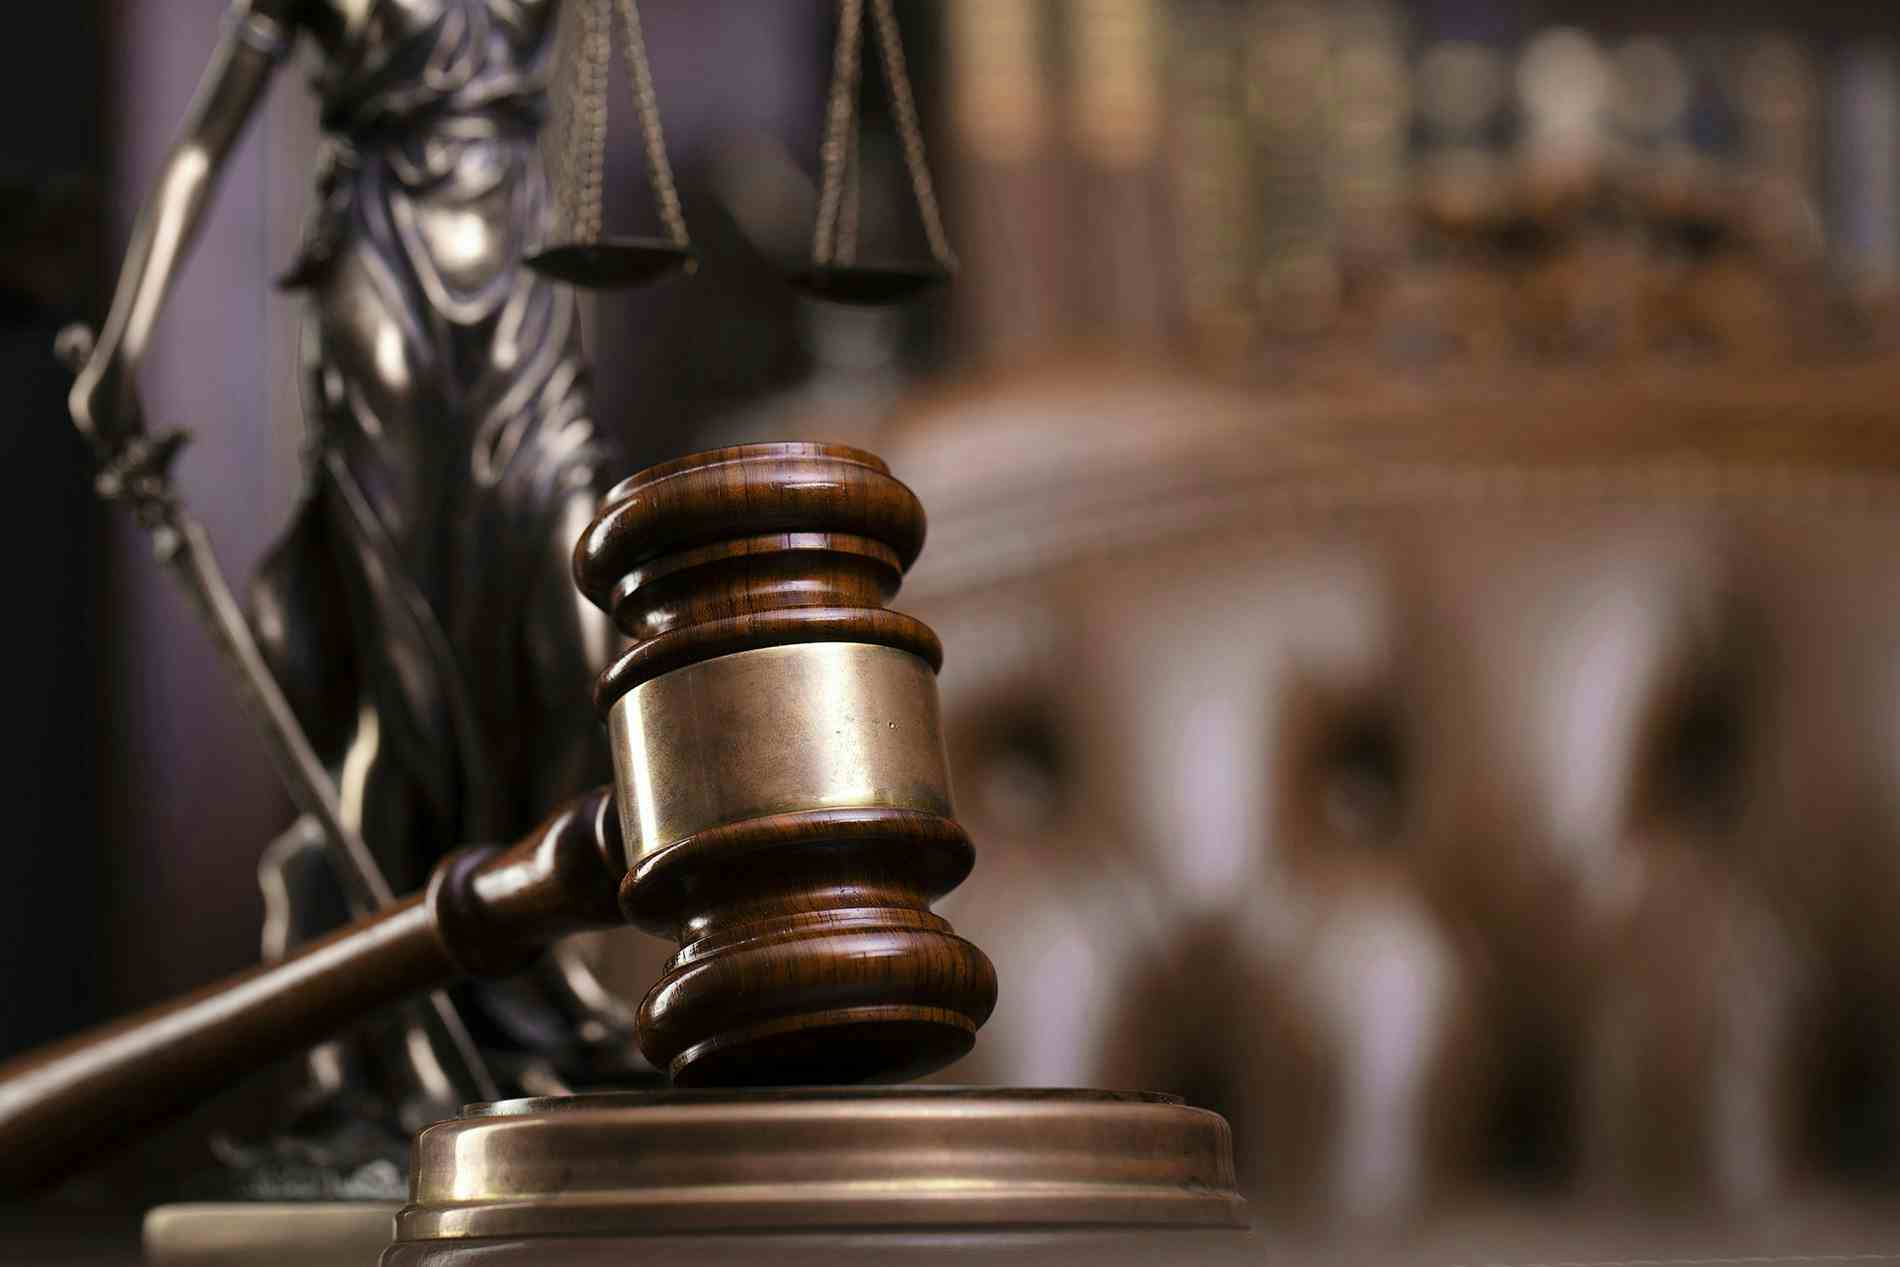 Gavel and scales of justice in courtroom